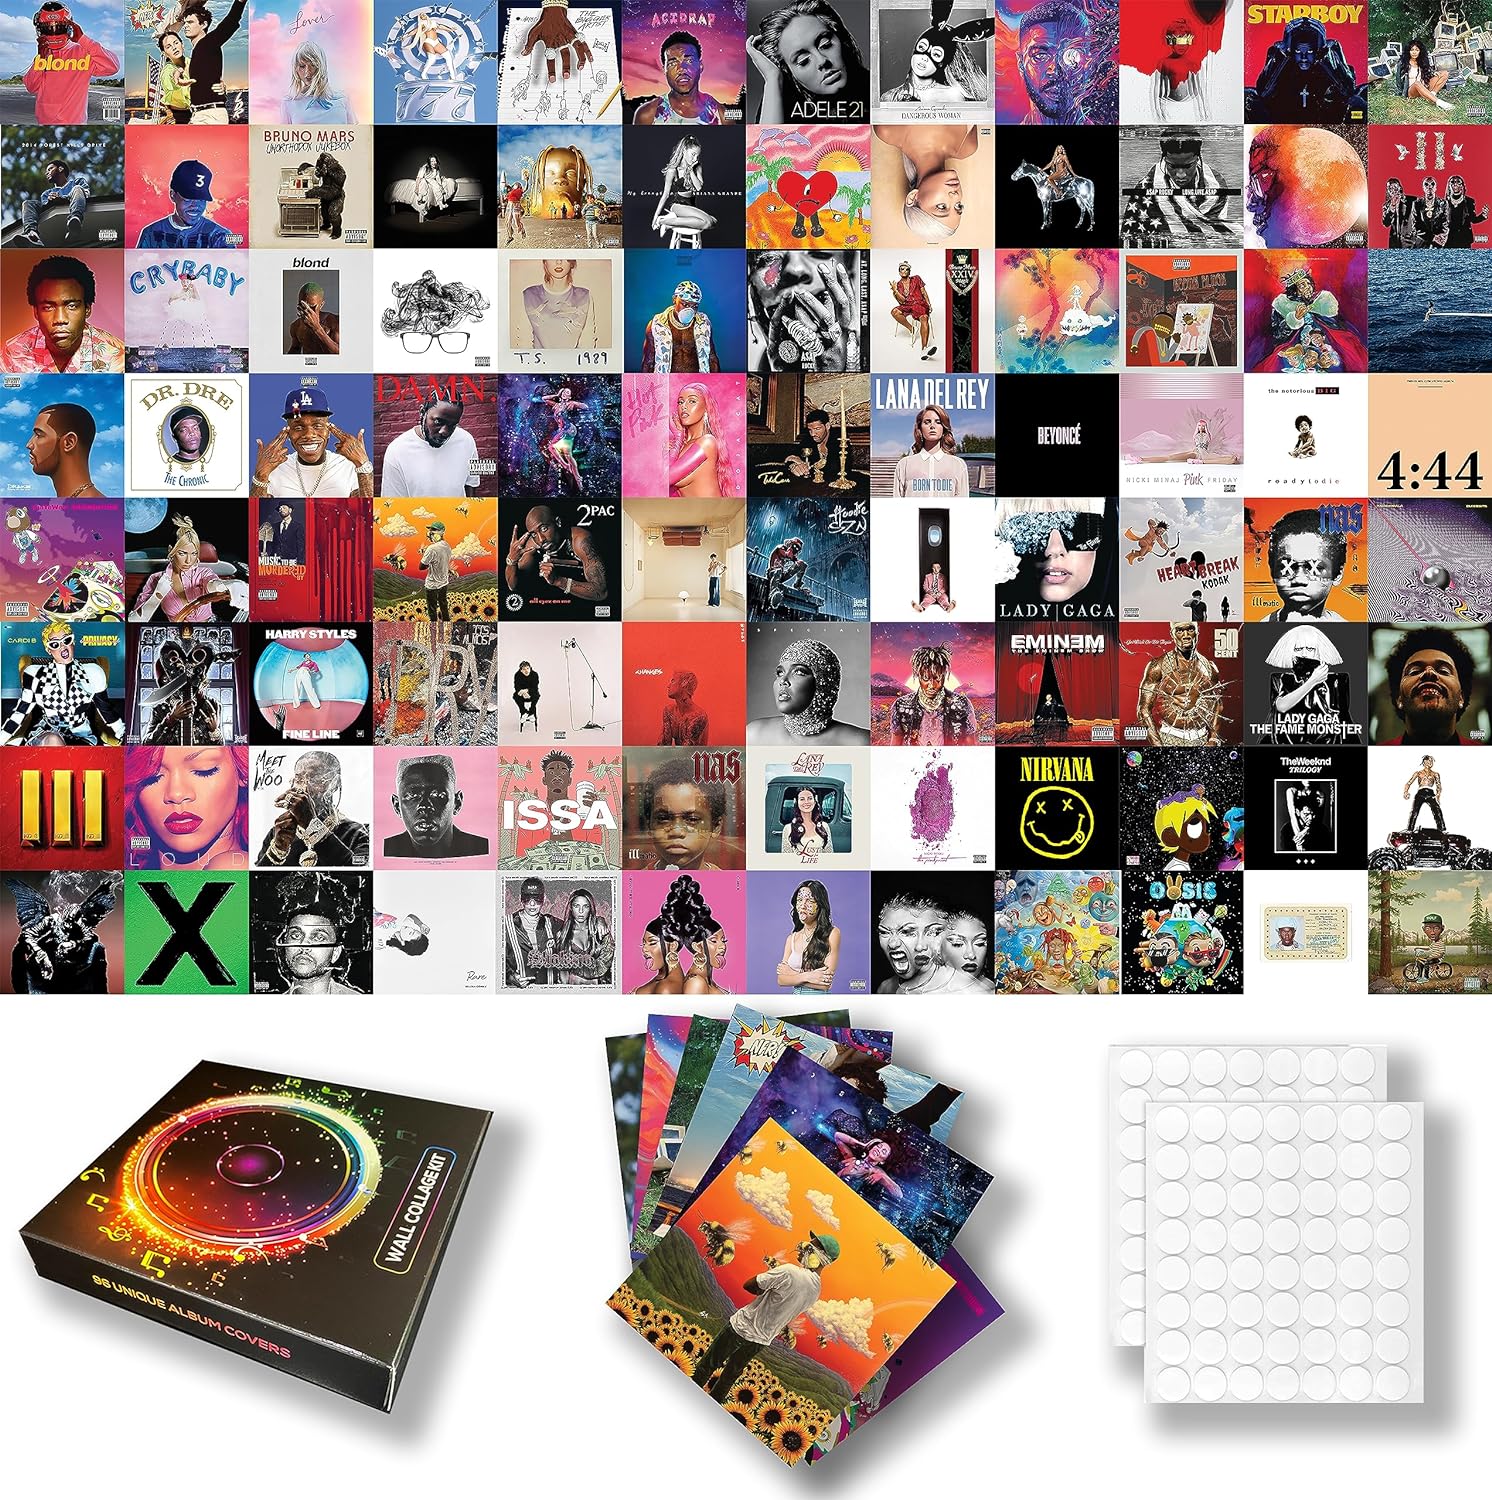 Set of 96 Unique Album Covers - Wall Collage Kit | Decoration HIP-HOP | Rap | Music Bands | Posters Measure 6x6 inches | Printed on GLOSS Paper | Set Includes Glue Dots for Easy Application